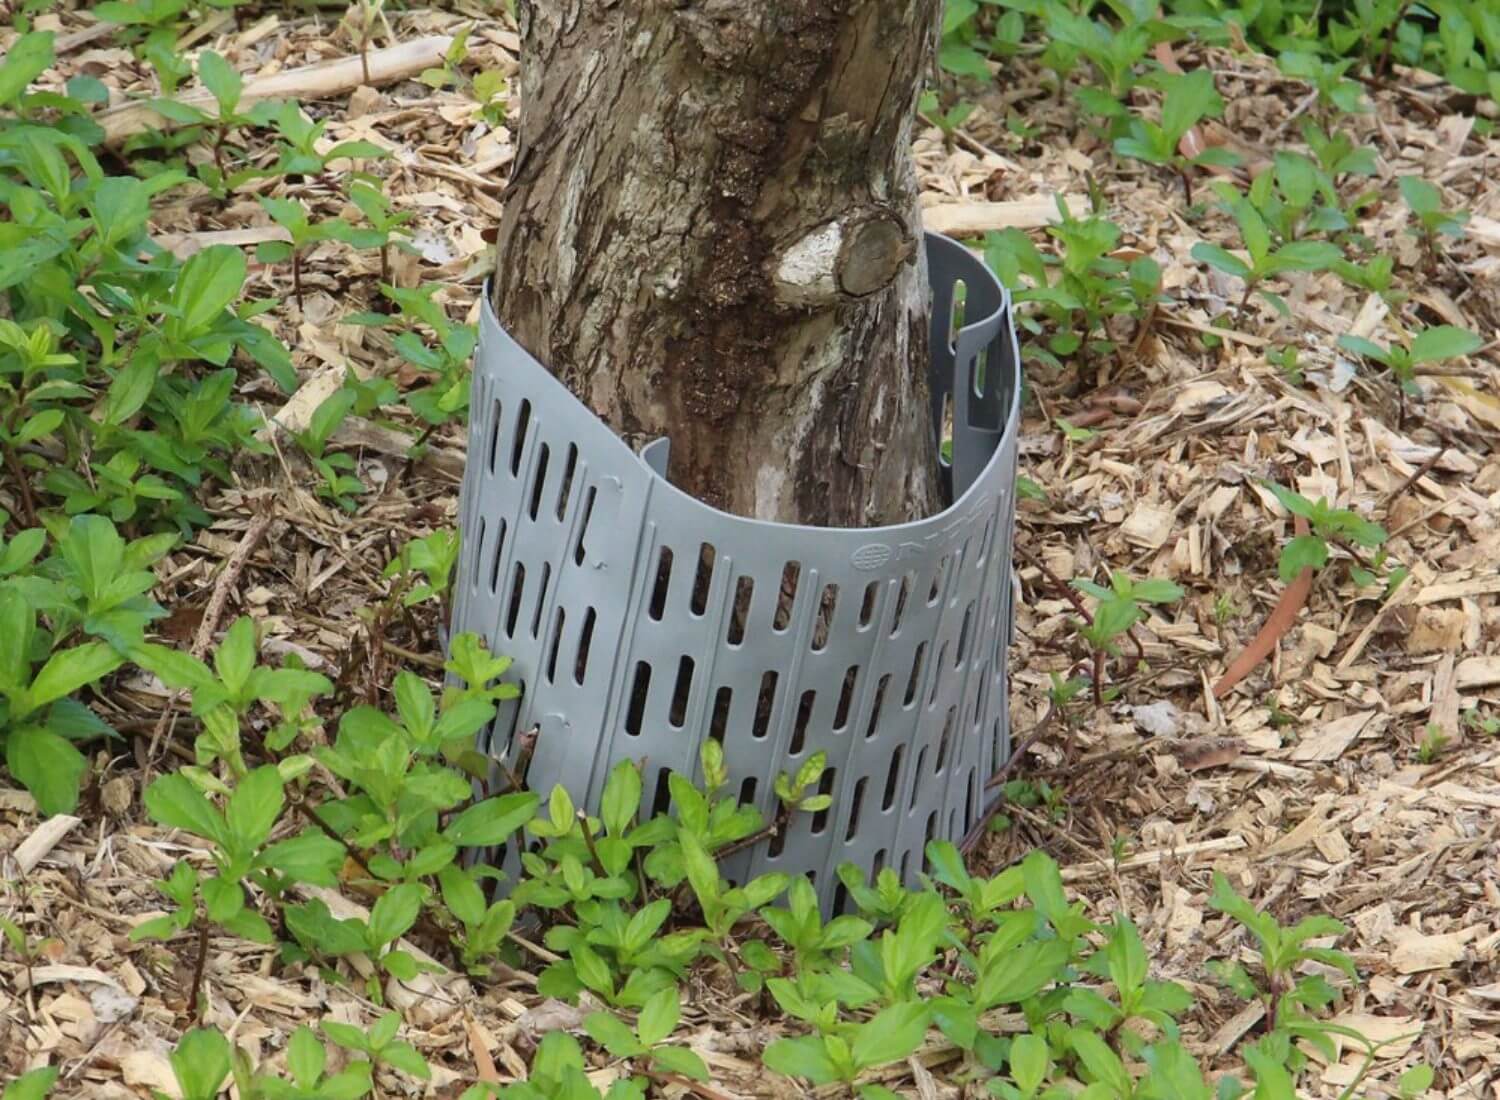 How to Protect Trees on Private Property